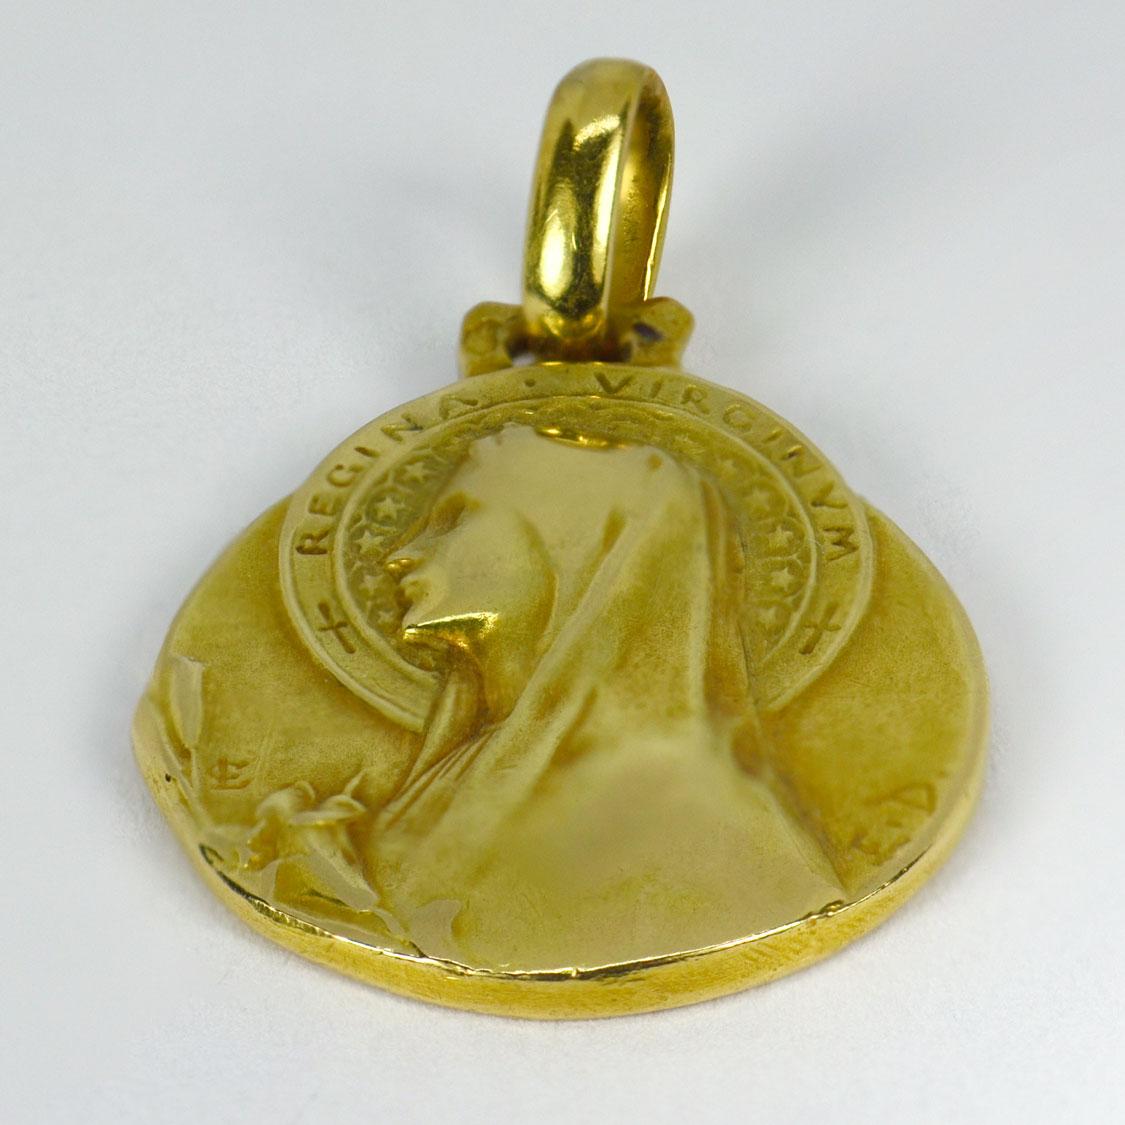 An 18 karat (18K) yellow gold pendant designed as a medal depicting the Virgin Mary with inscription ‘Regina Virginum’. Signed E.D for Emile Dropsy. Stamped with the eagle’s head for French manufacture and 18 karat gold and engraved ‘Paulette 16